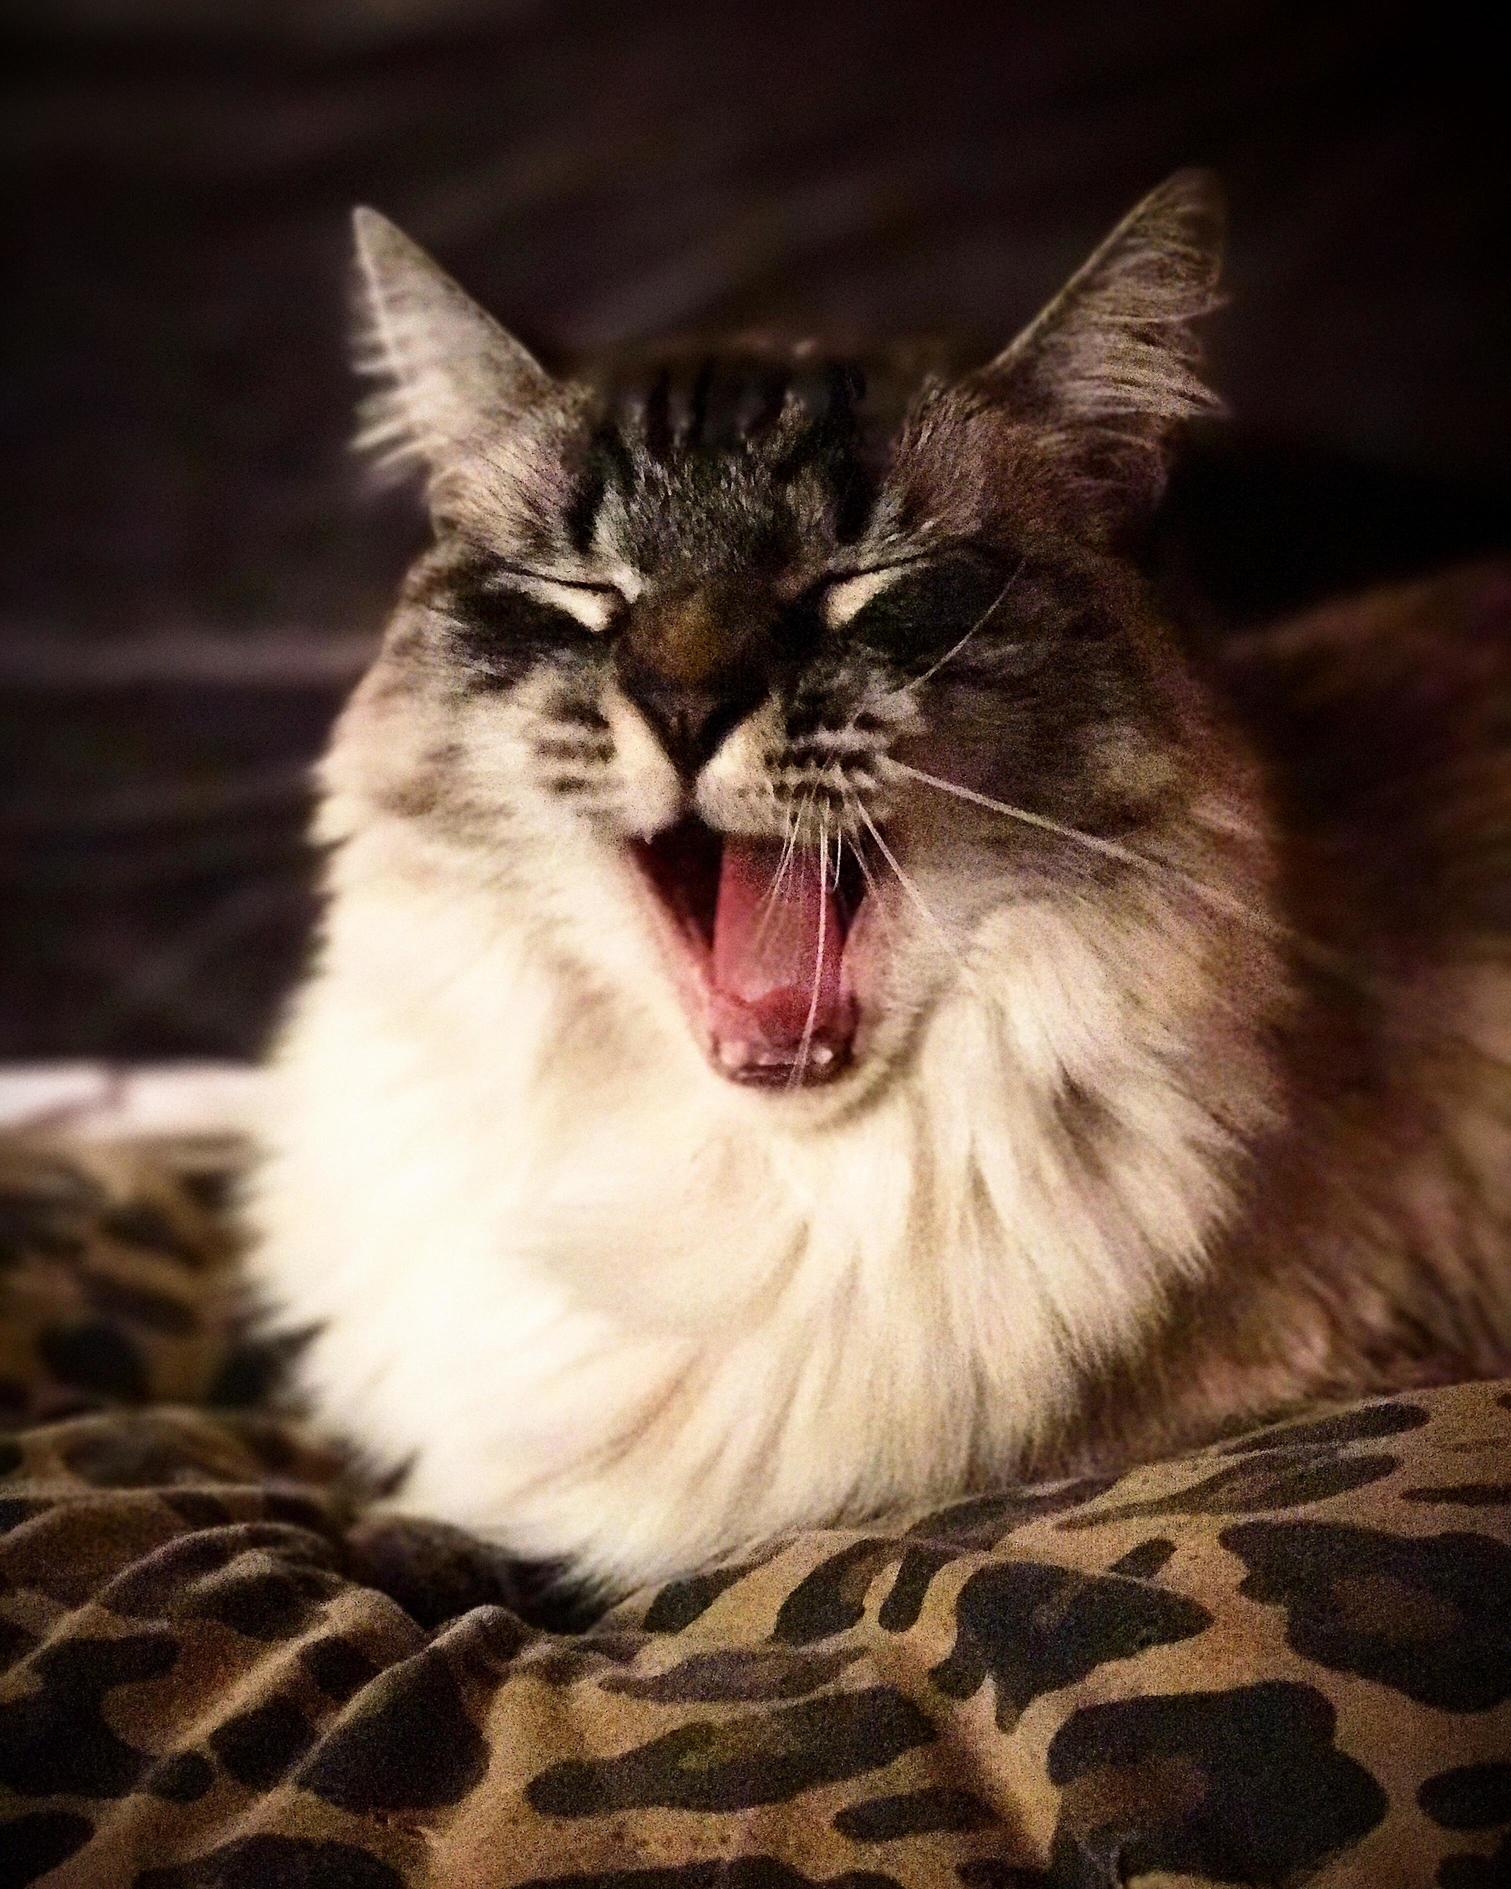 Cat picture my child mid yawn.